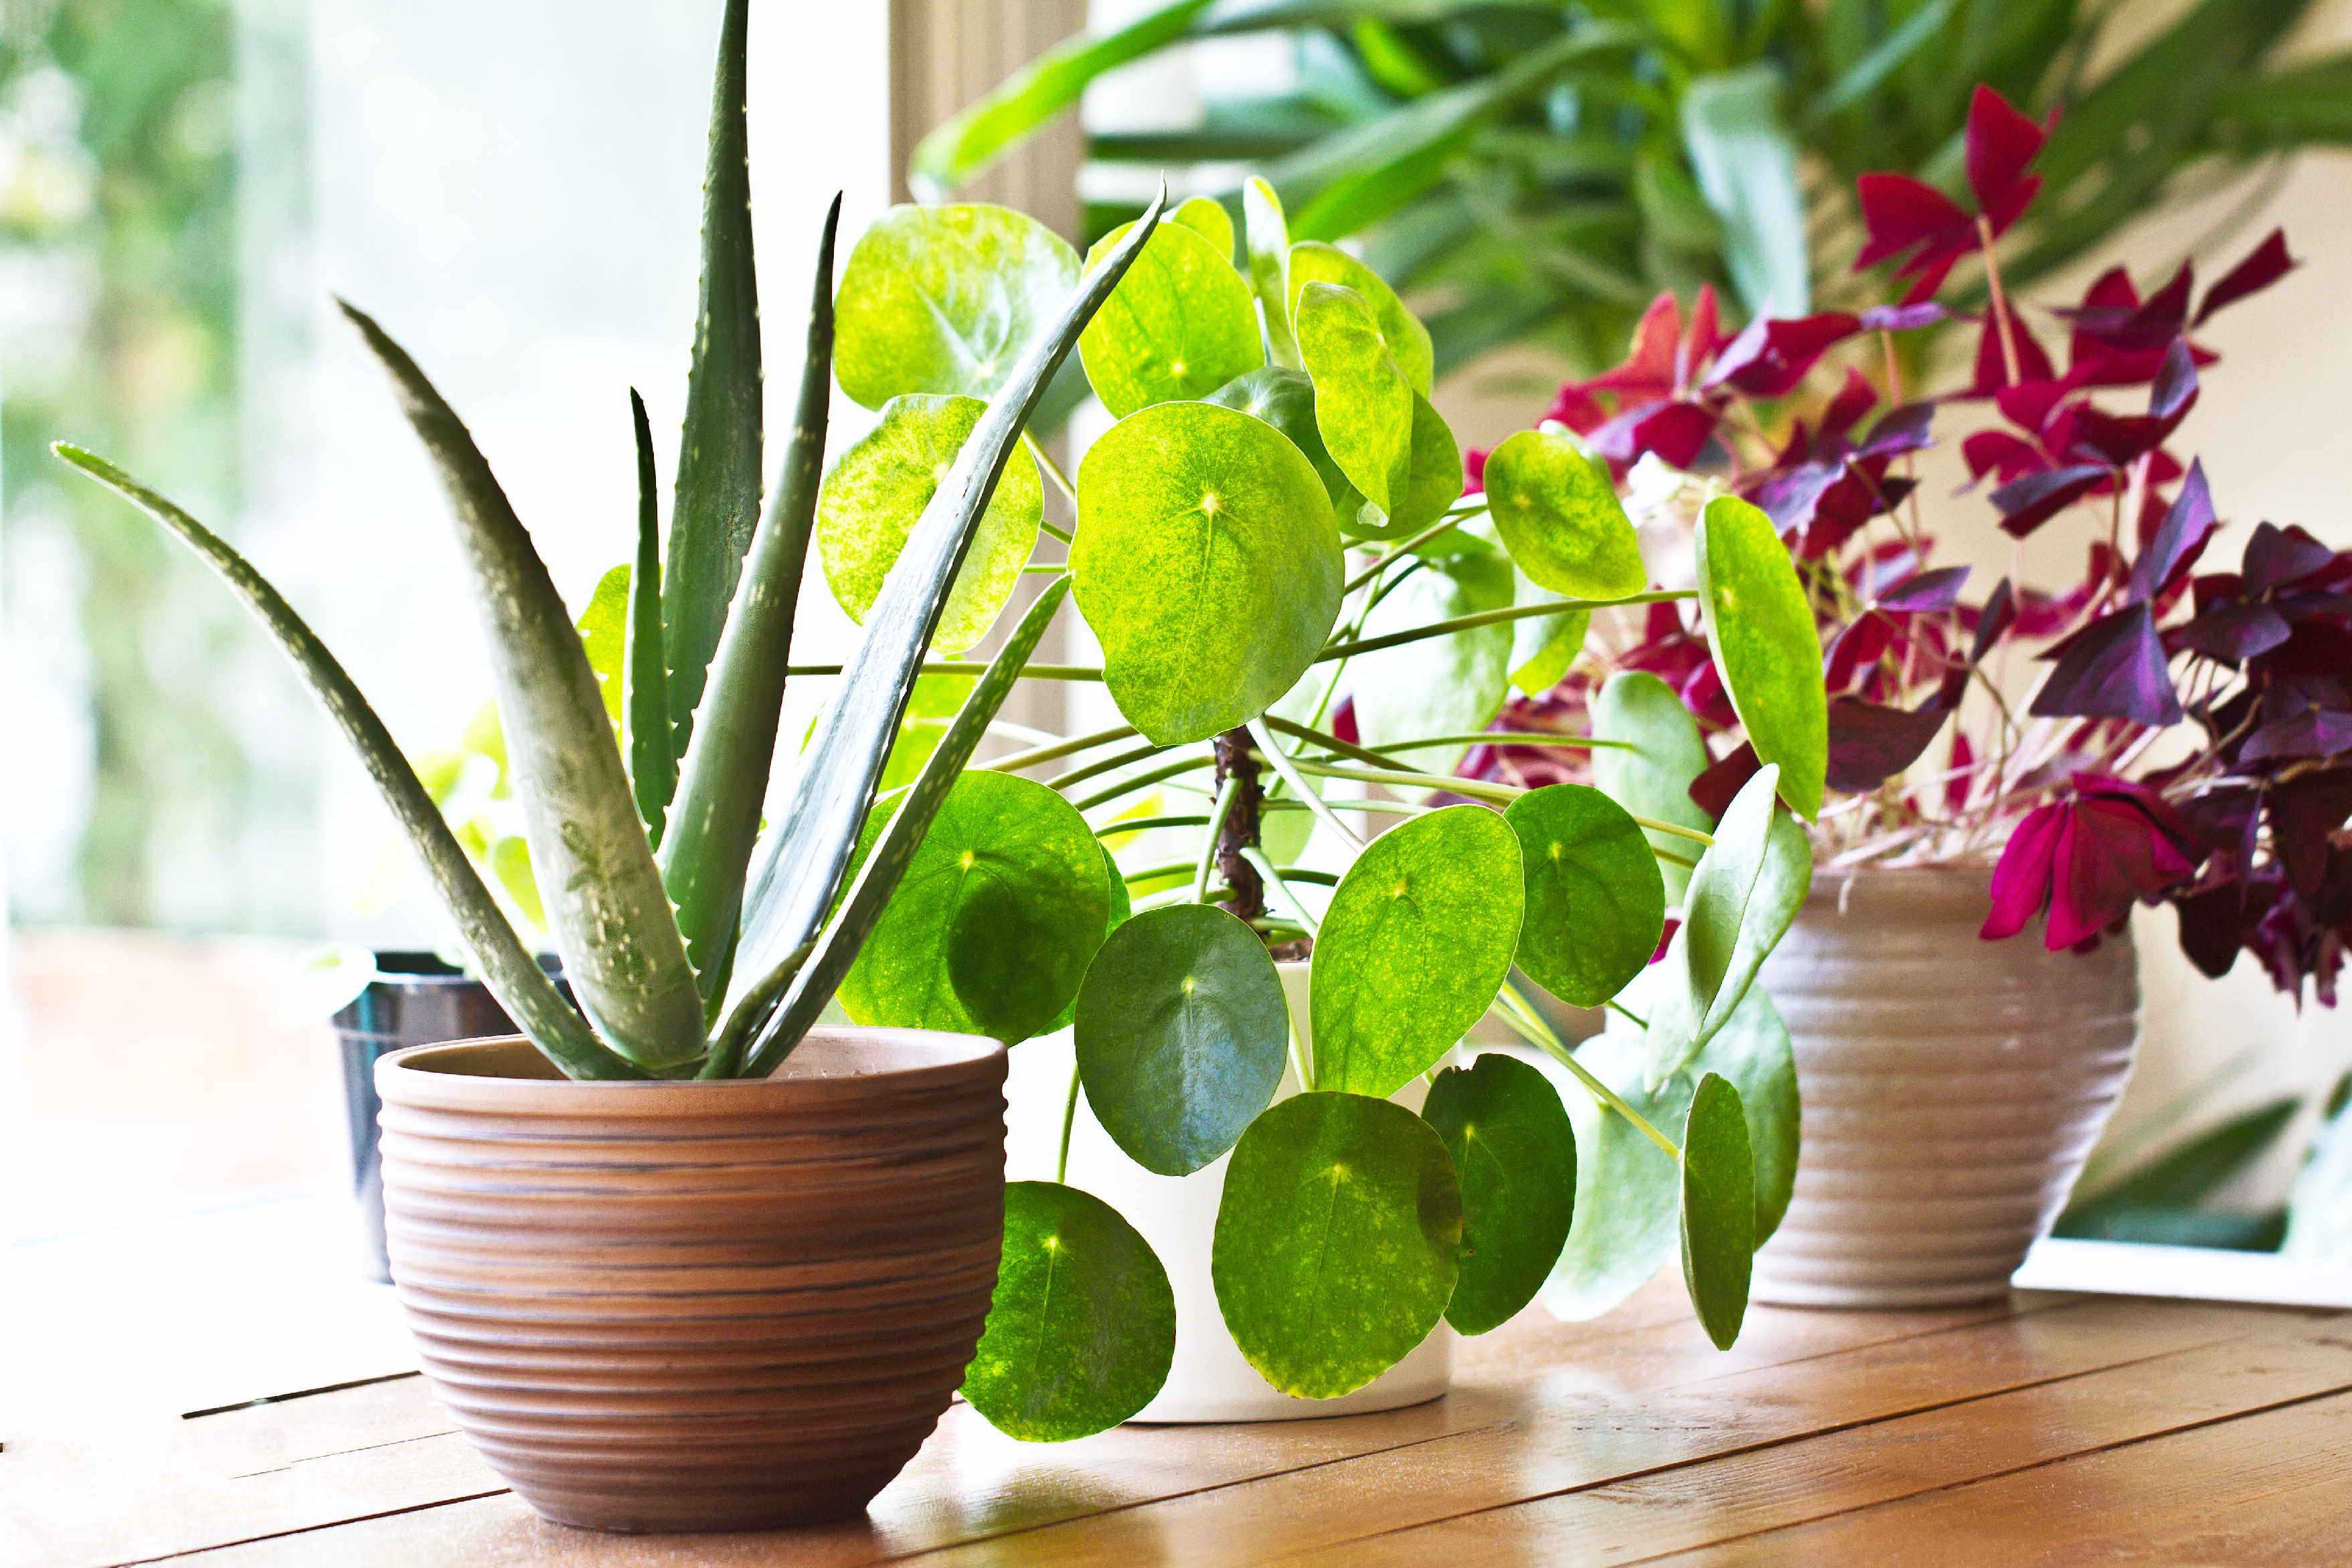 21 of the best indoor plants for your home   Whitegates